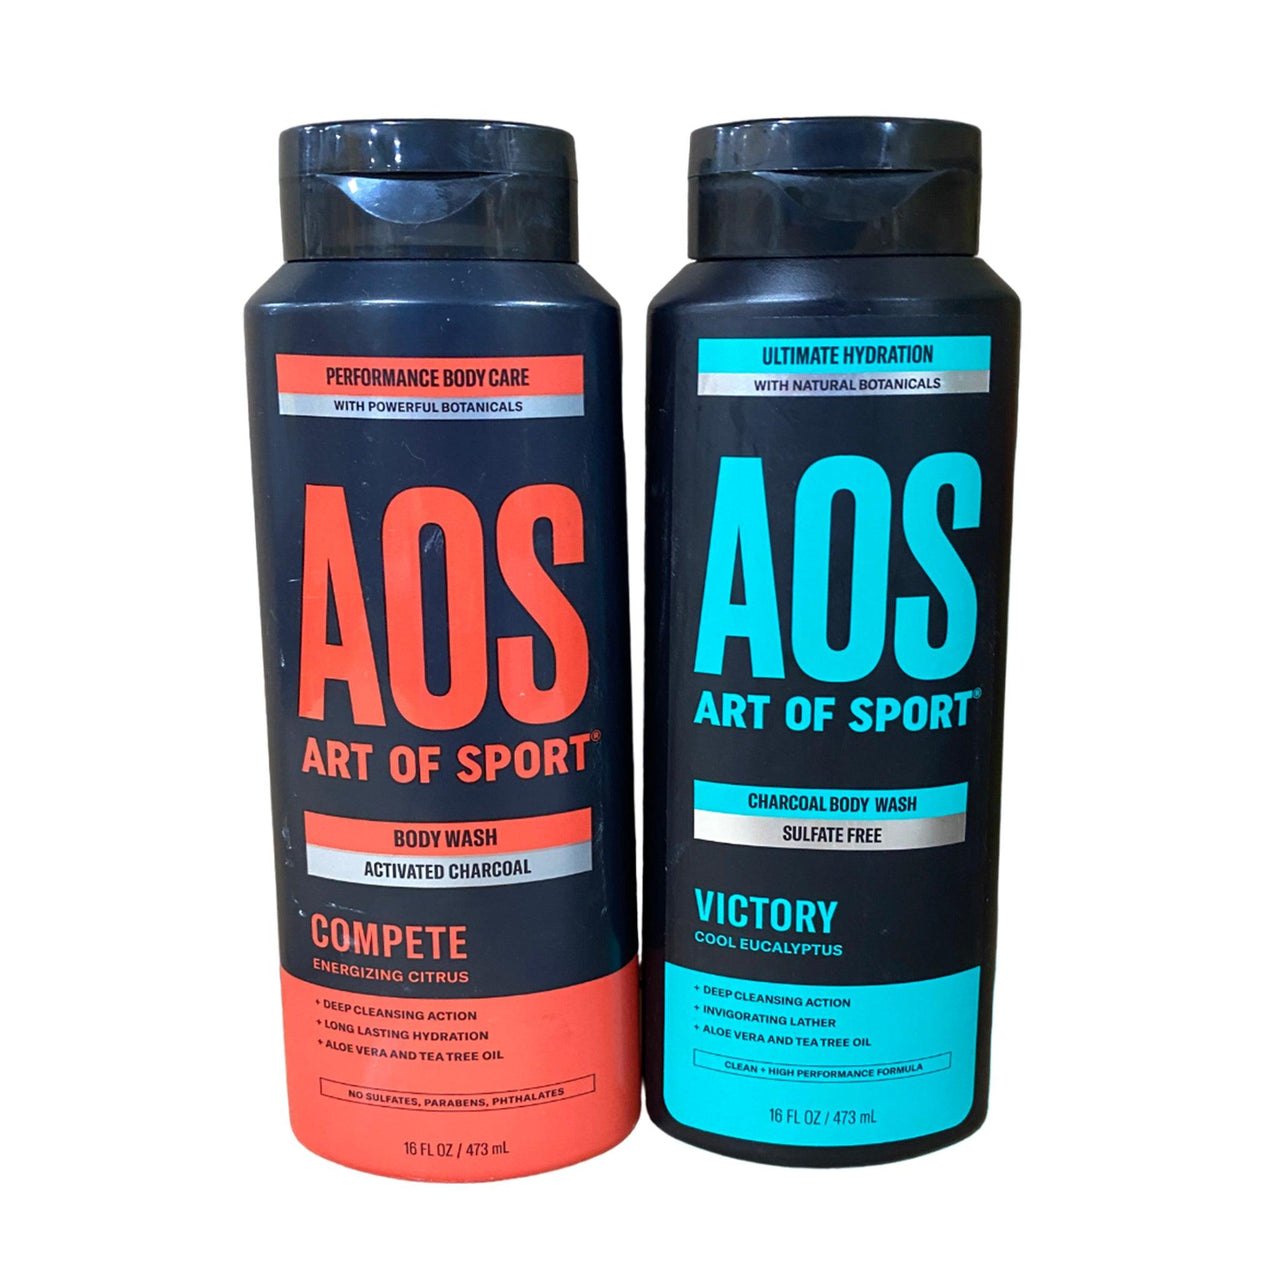 AOS Art of Sport Body Wash Activated Charcoal - Wholesale (50 Pcs Box) - Discount Wholesalers Inc